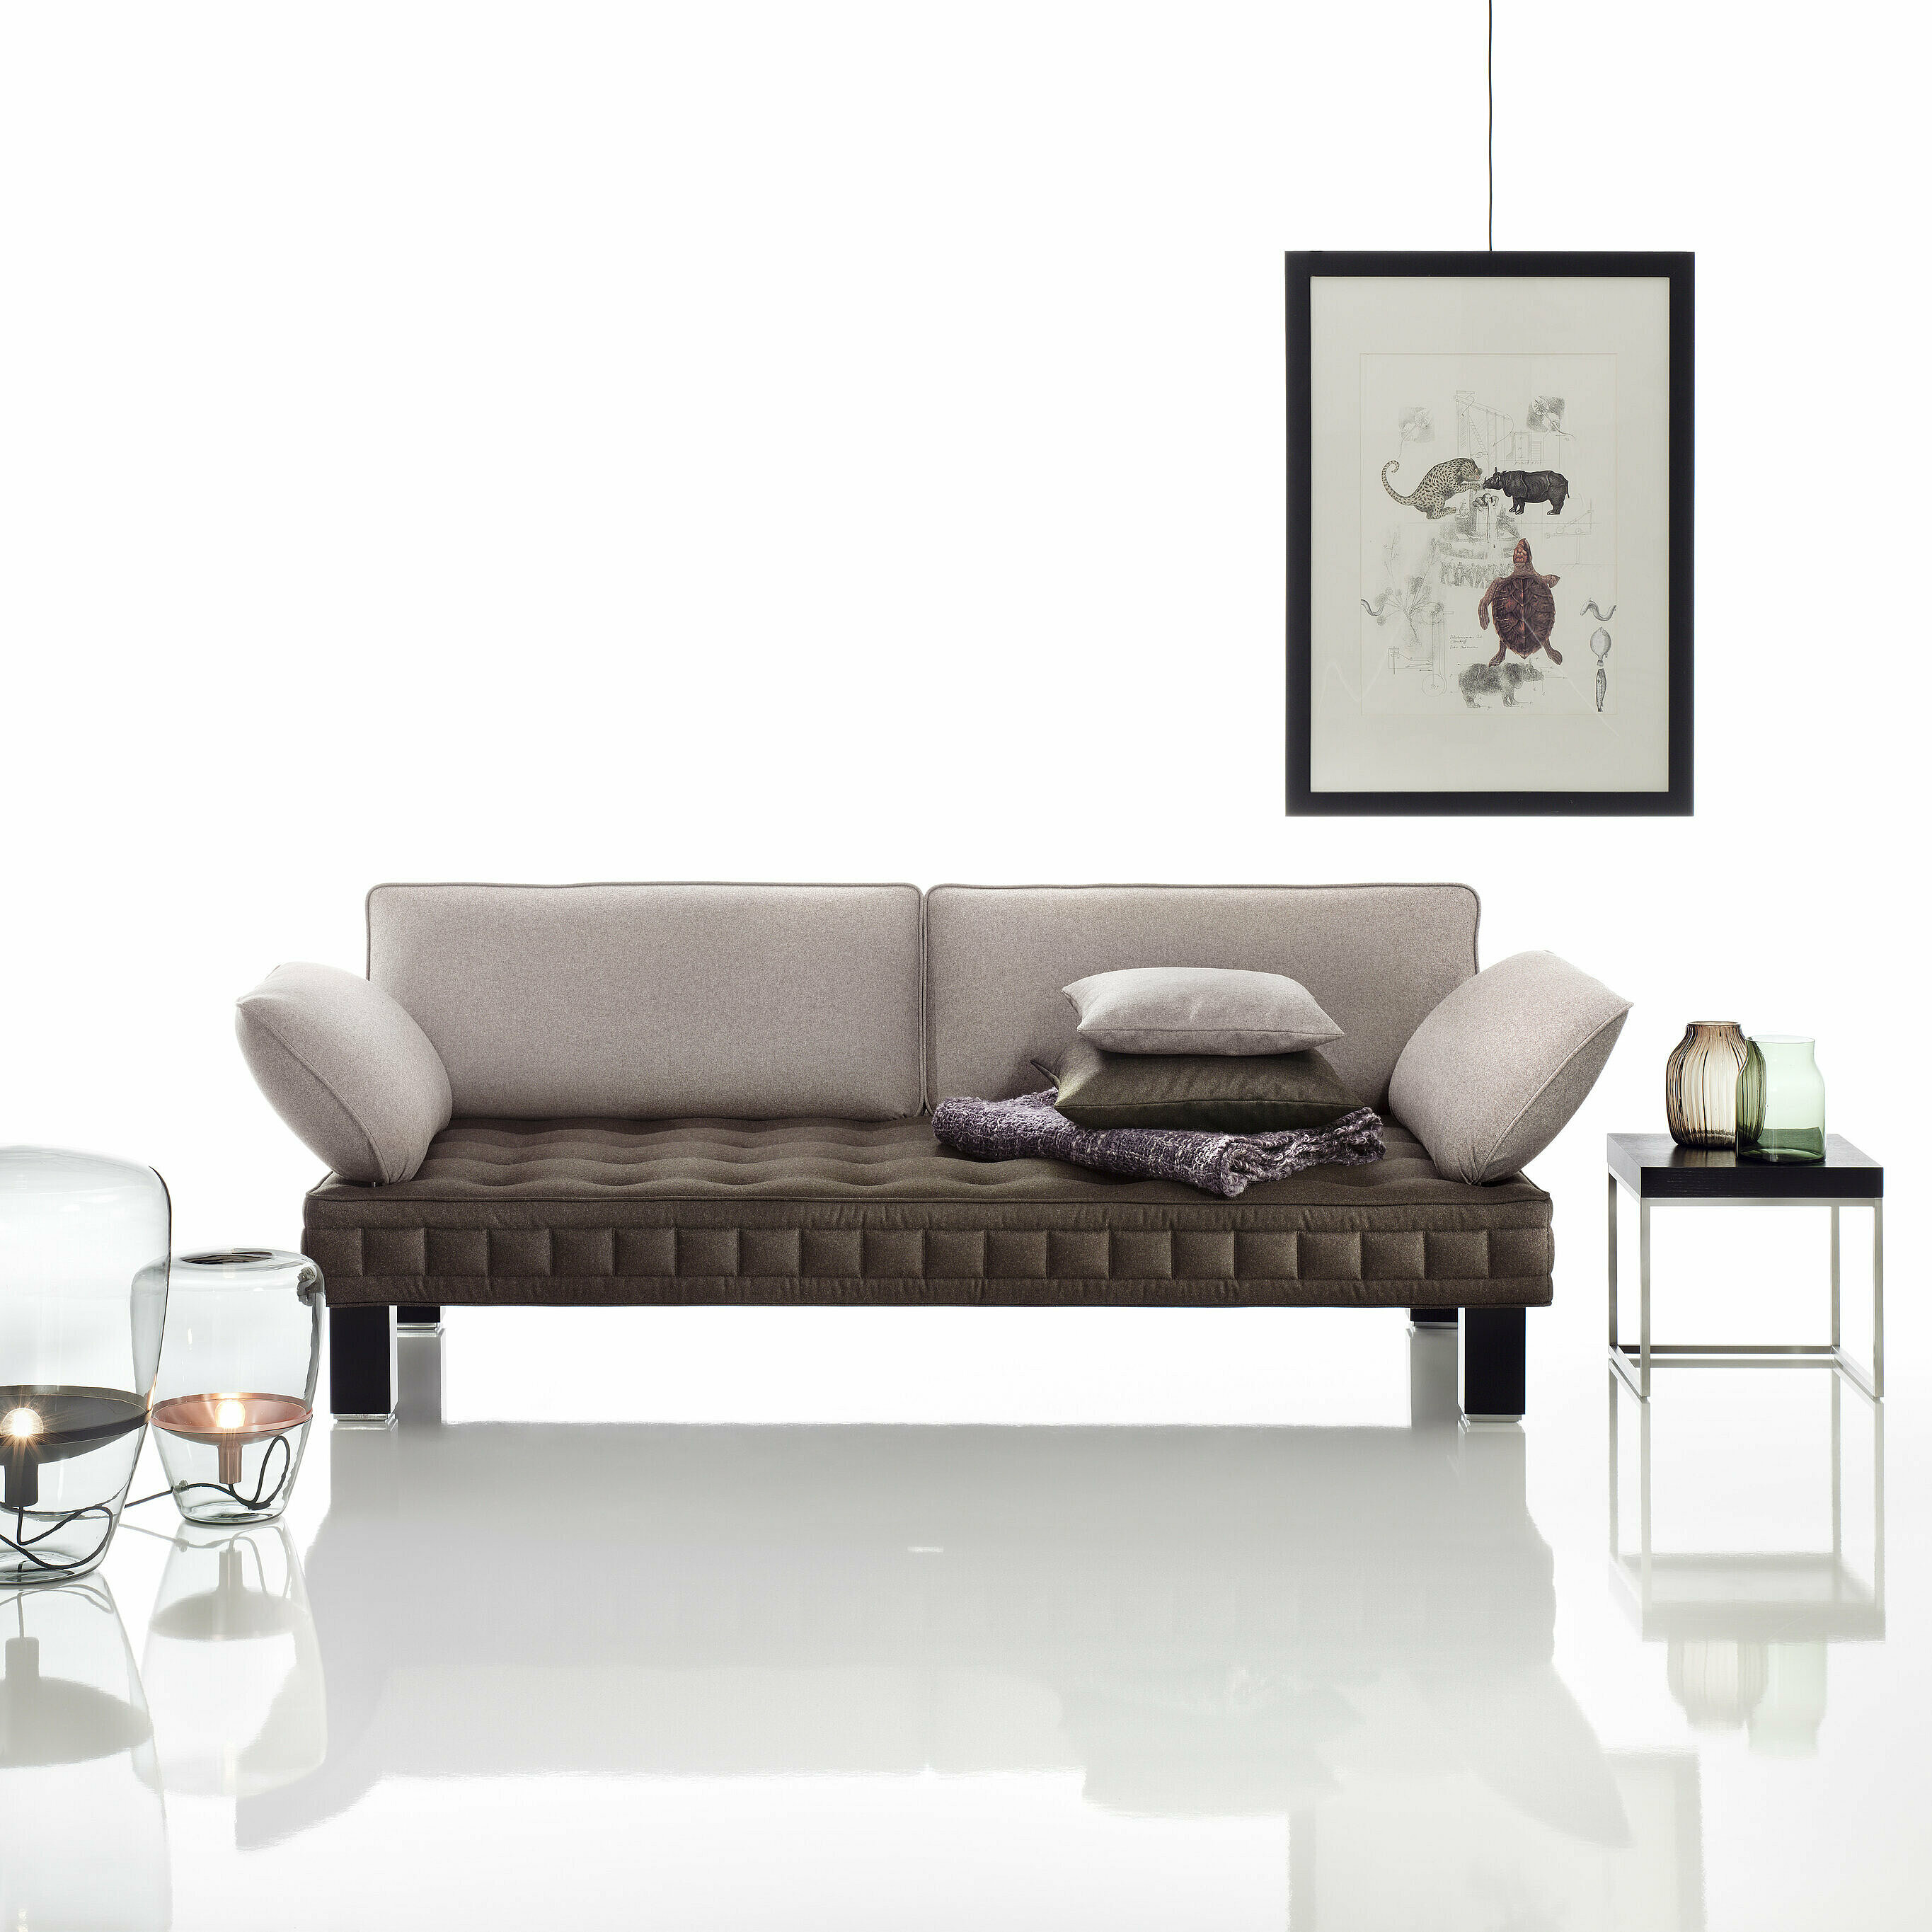 Materassi sofa two-colored, arm and backrests in loden stone, seat in loden terra